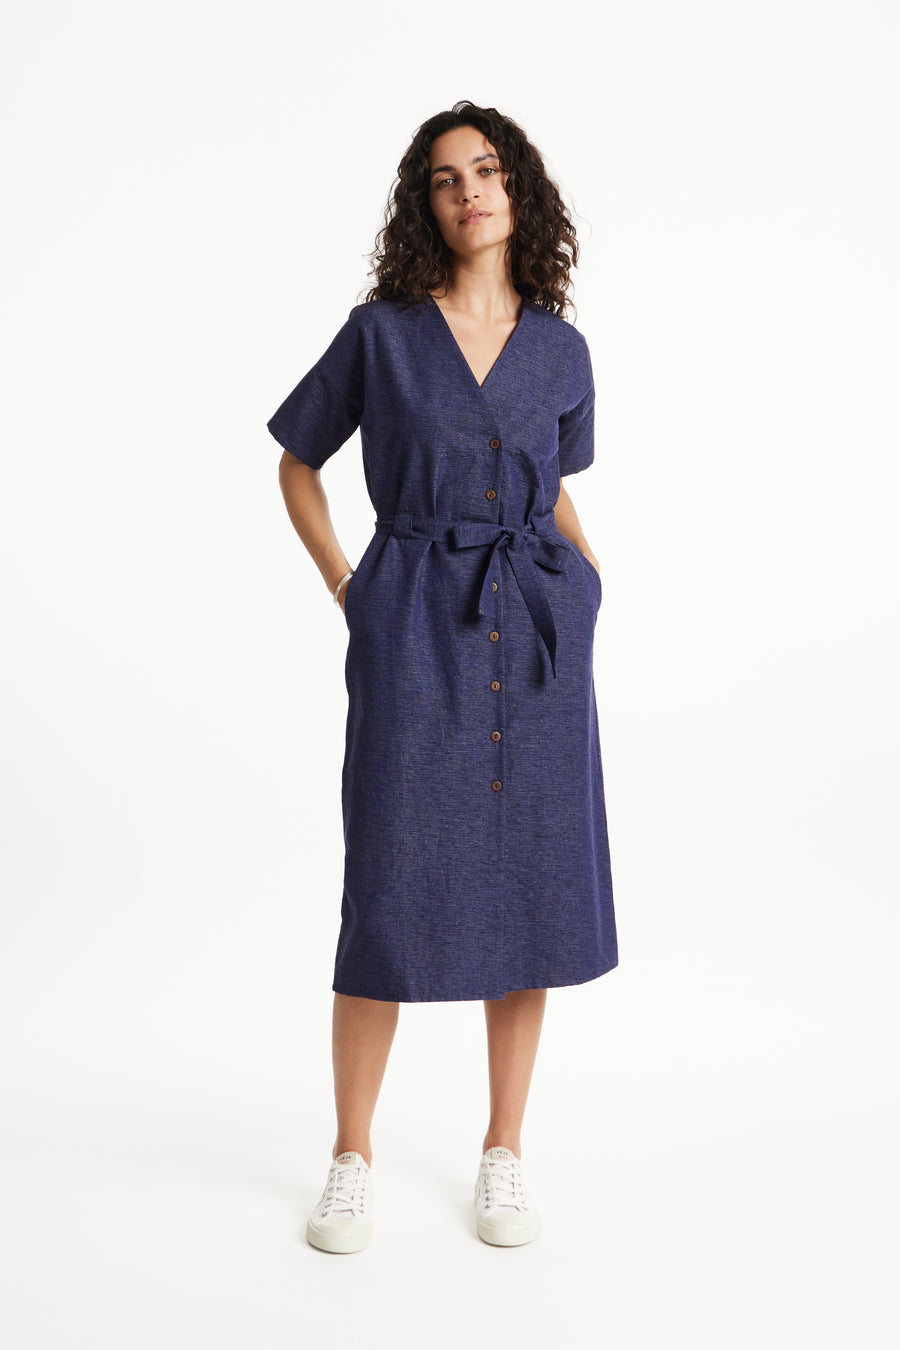 People Tree Fair Trade, Ethical & Sustainable India Dress in Navy 100% Organic Cotton